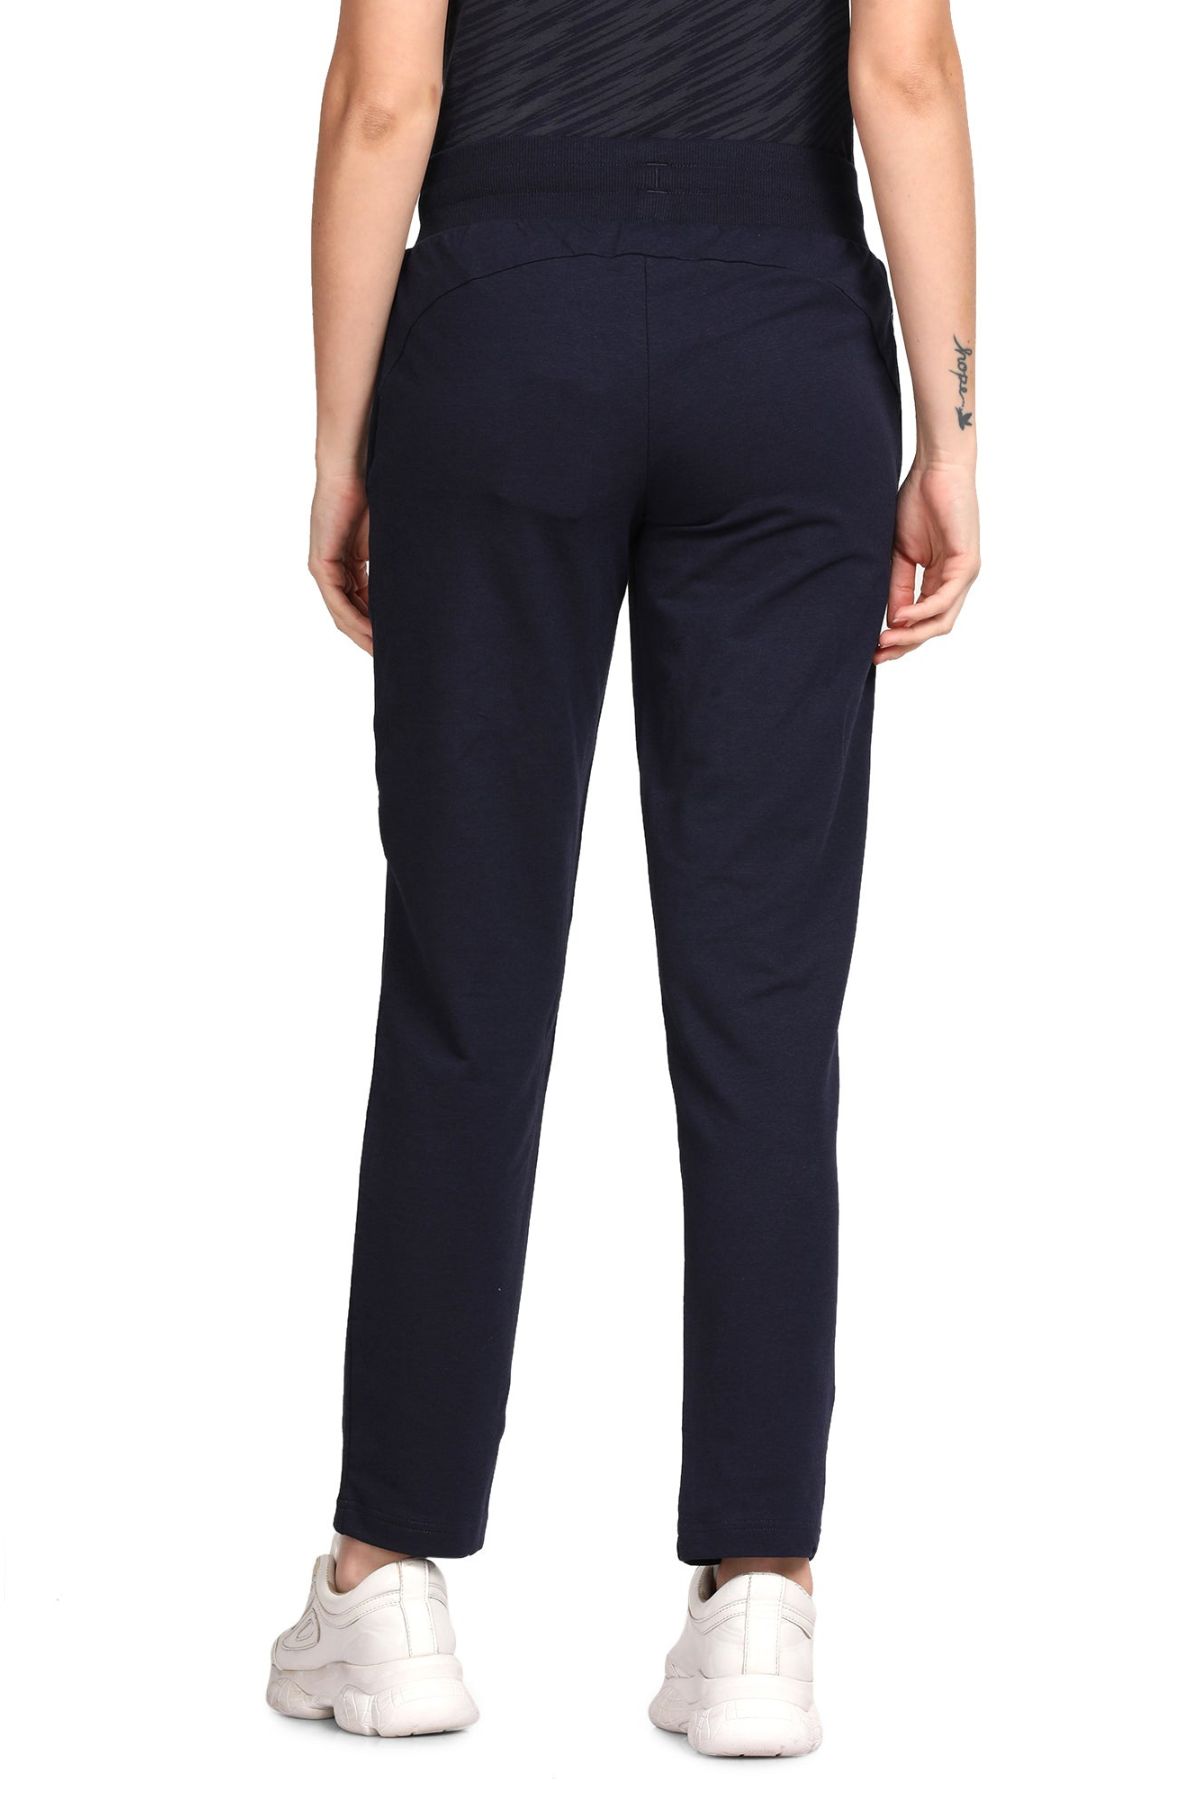 Dickies Women's Low Rise Twill Slim Fit Stretch Pant - Work World